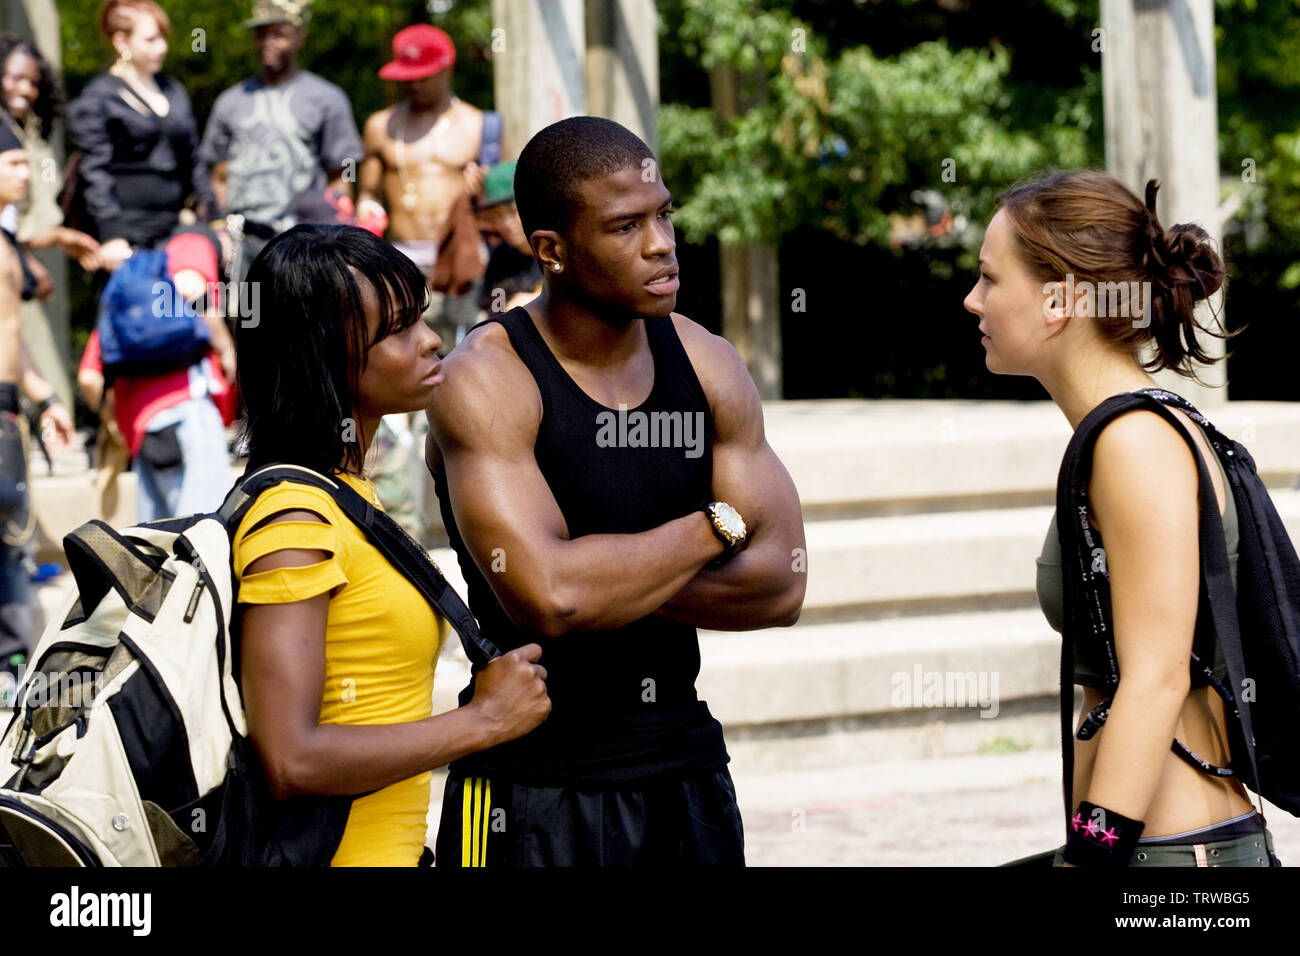 BLACK THOMAS , BRIANA EVIGAN and TELISHA SHAW in STEP UP 2: THE STREETS (2008). Copyright: Editorial use only. No merchandising or book covers. This is a publicly distributed handout. Access rights only, no license of copyright provided. Only to be reproduced in conjunction with promotion of this film. Credit: OFFSPRING ENTERTAINMENT/SUMMIT ENTERTAINMENT/TOUCHSTONE PICT / BALLARD, KAREN / Album Stock Photo